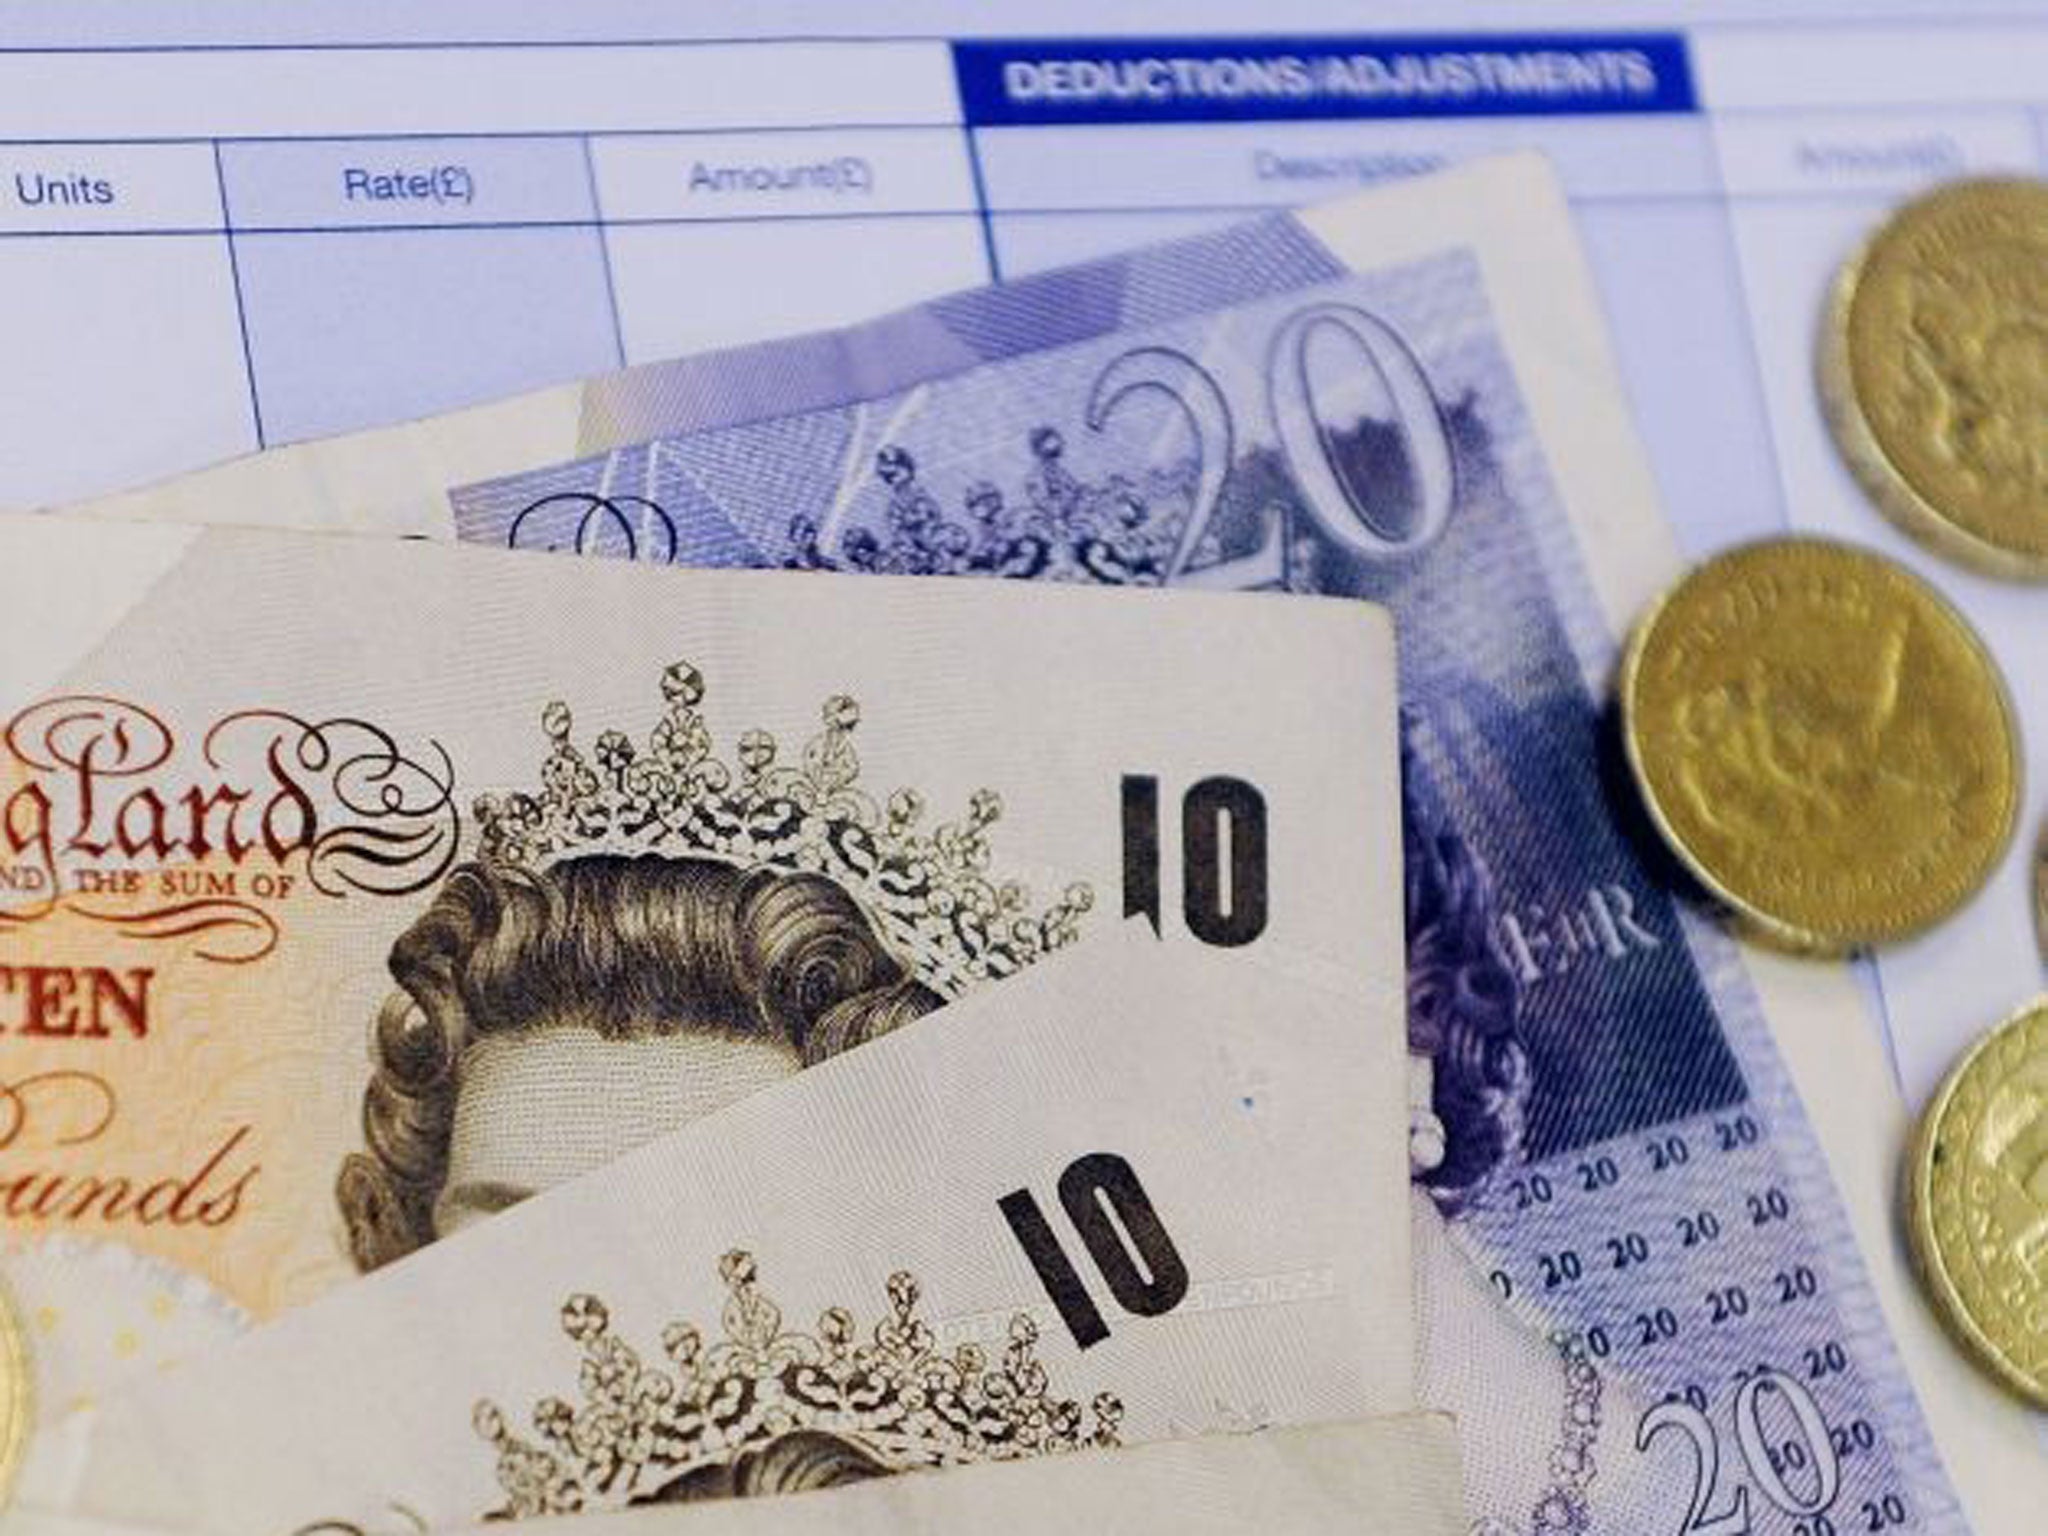 Employers fined almost £2 million for failing to pay minimum wage